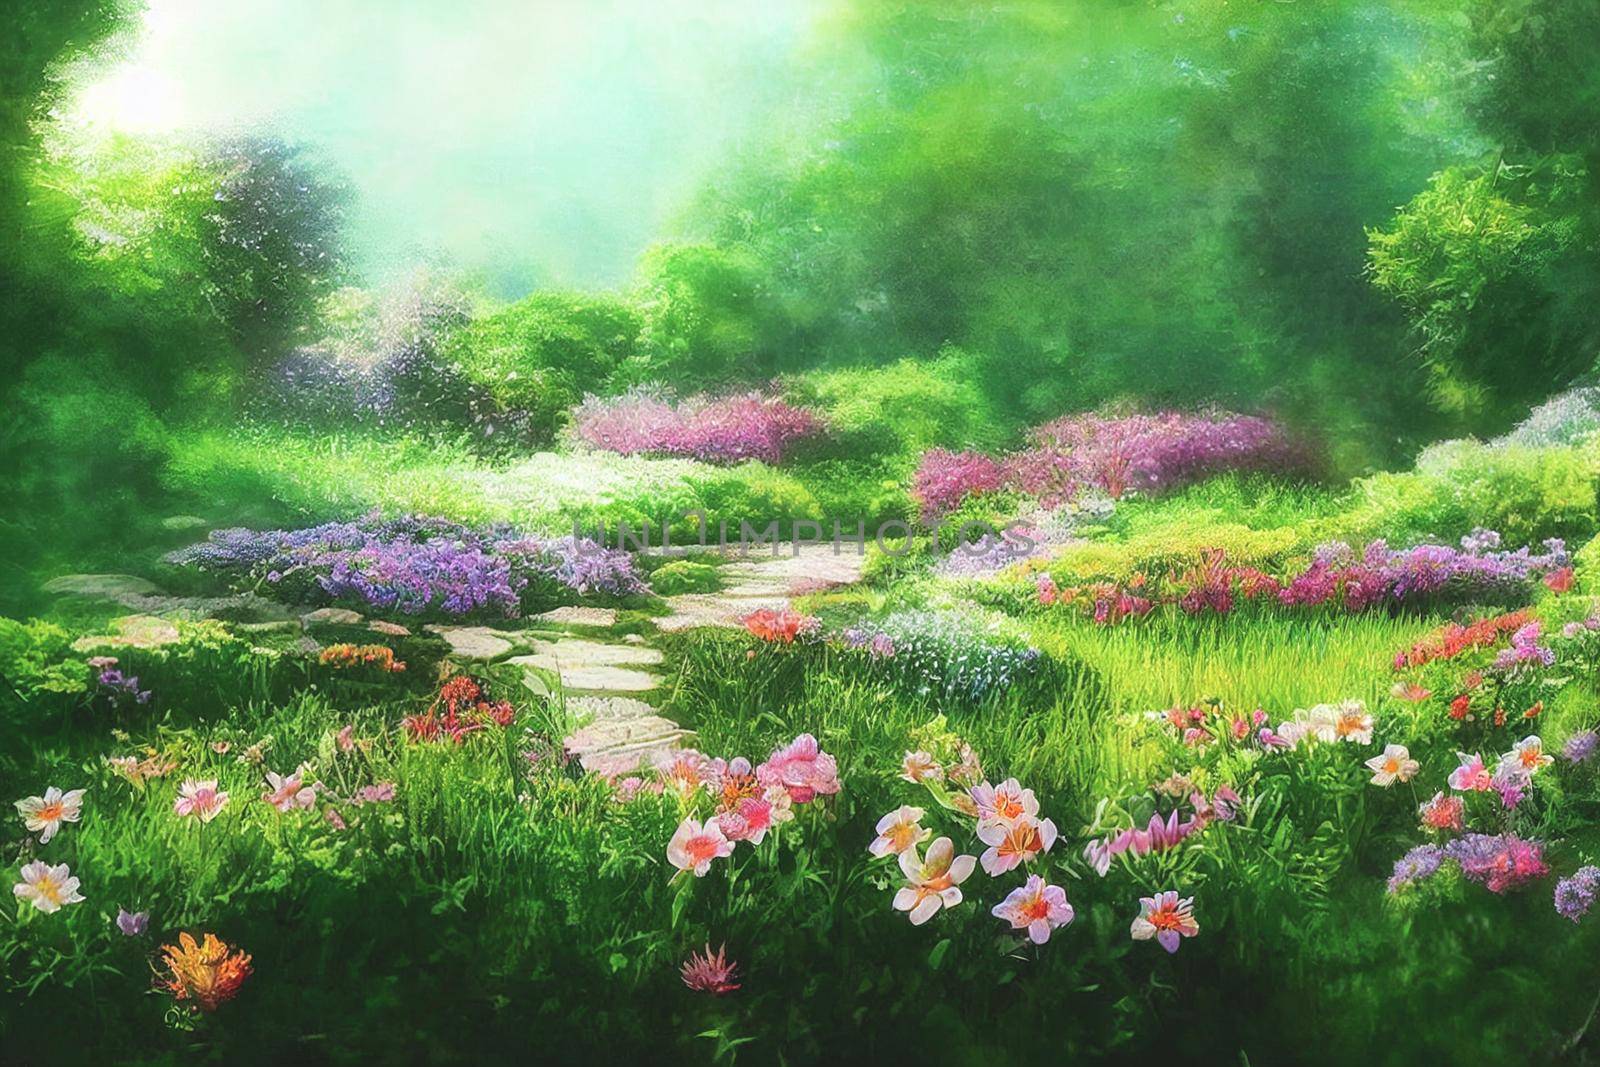 3D render digital painting of garden with flowers and trees, Floral HD wallpaper 3D illustration